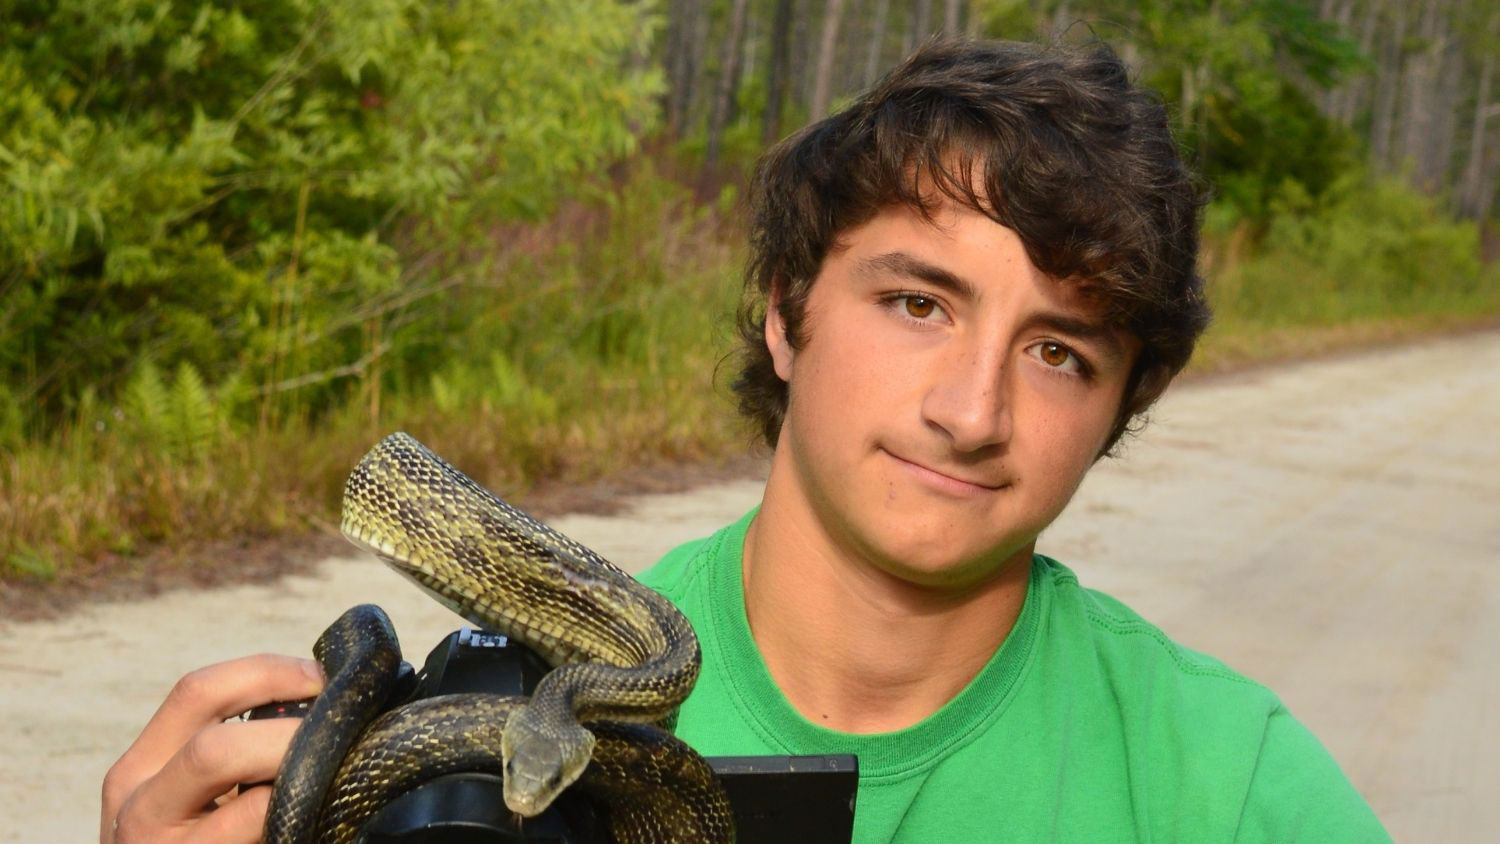 Ben Zino with a snake